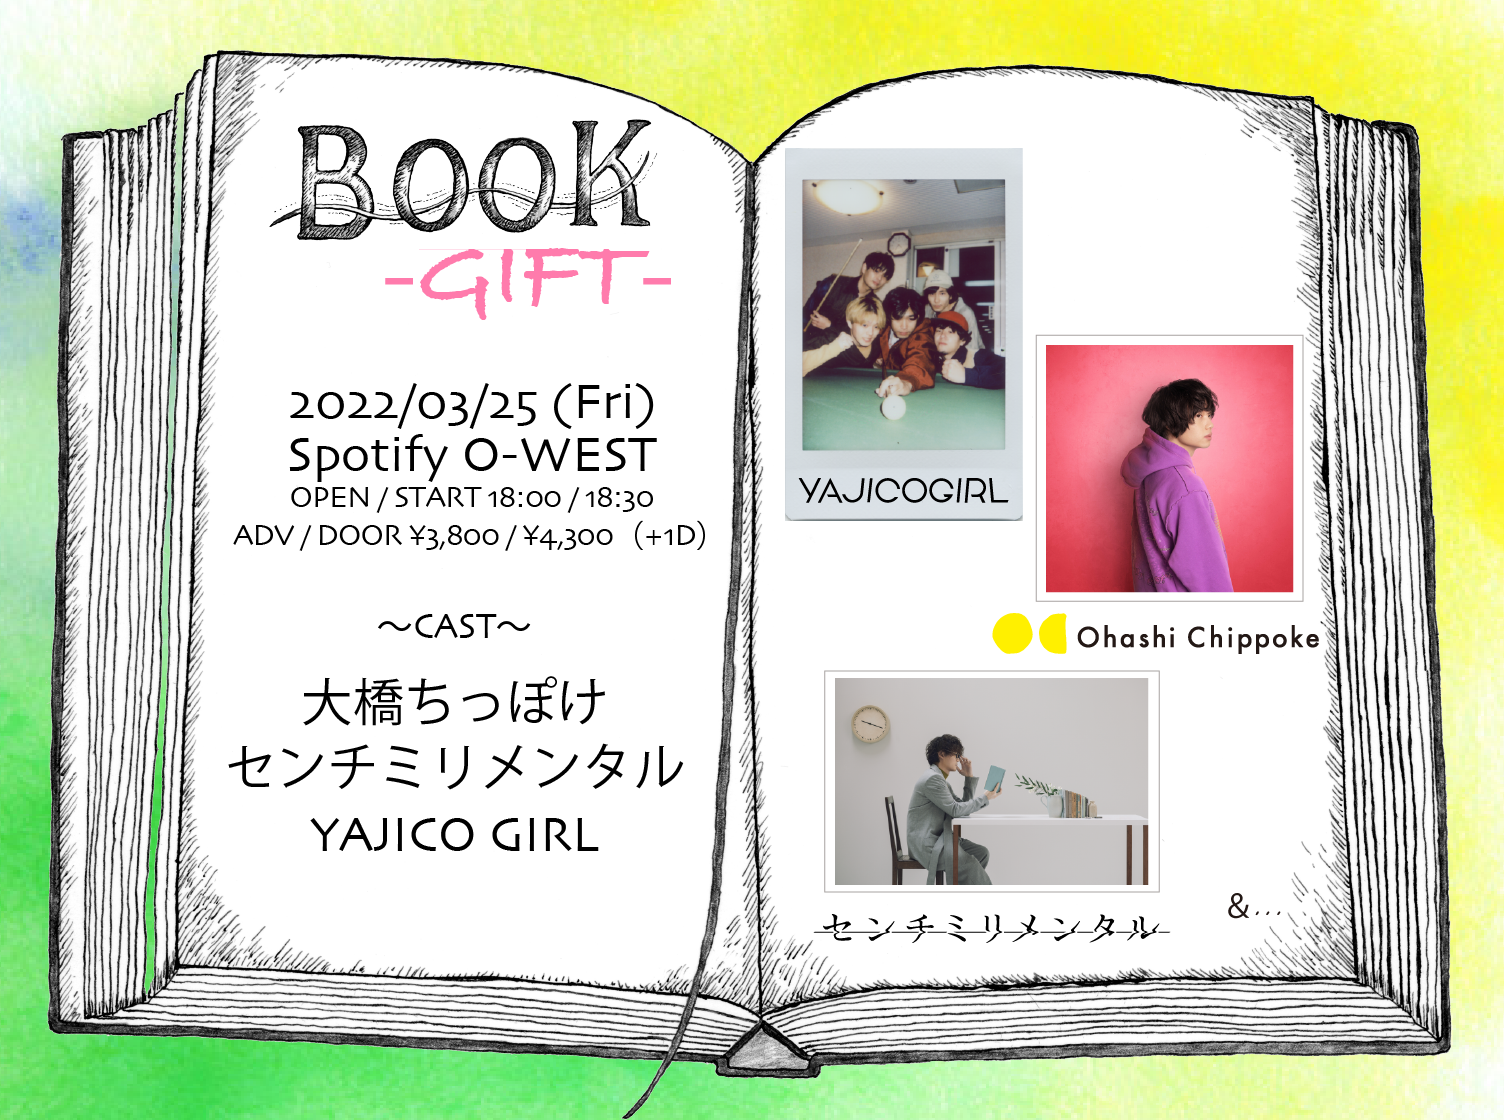 BOOK -GIFT-